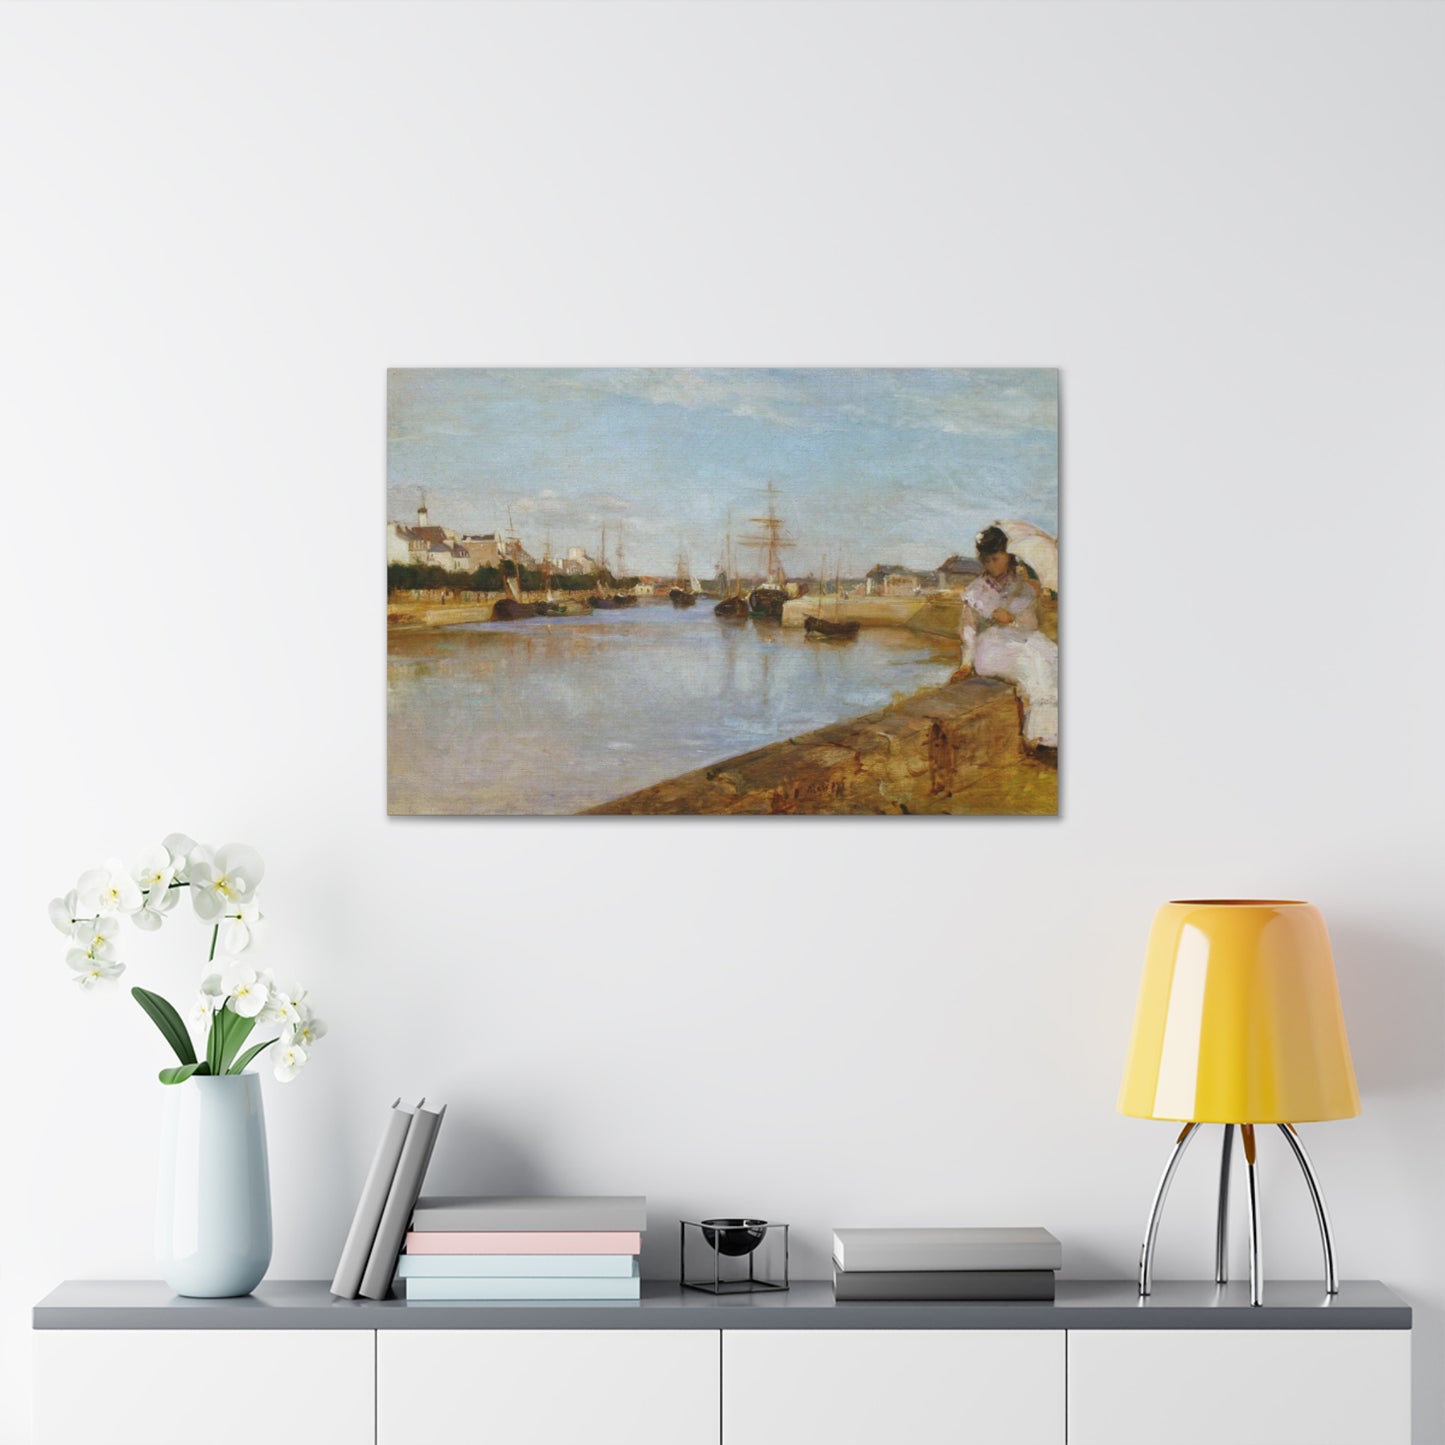 The Harbor at Lorient by Berthe Morisot - Canvas Print